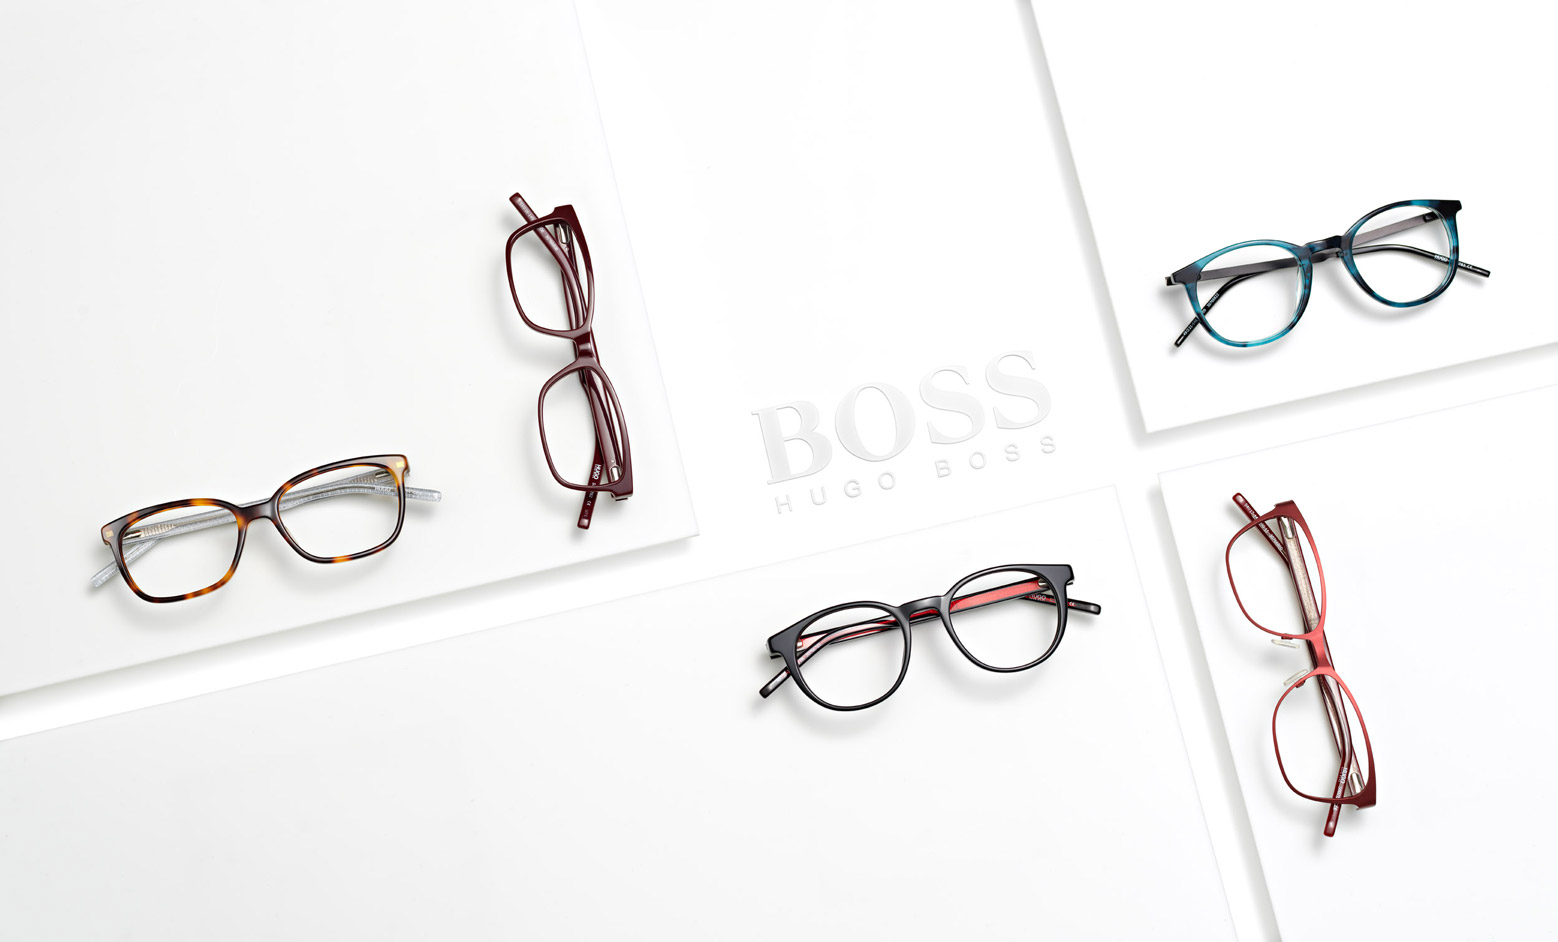 Flat lay image of Hugo Boss glasses on a white background